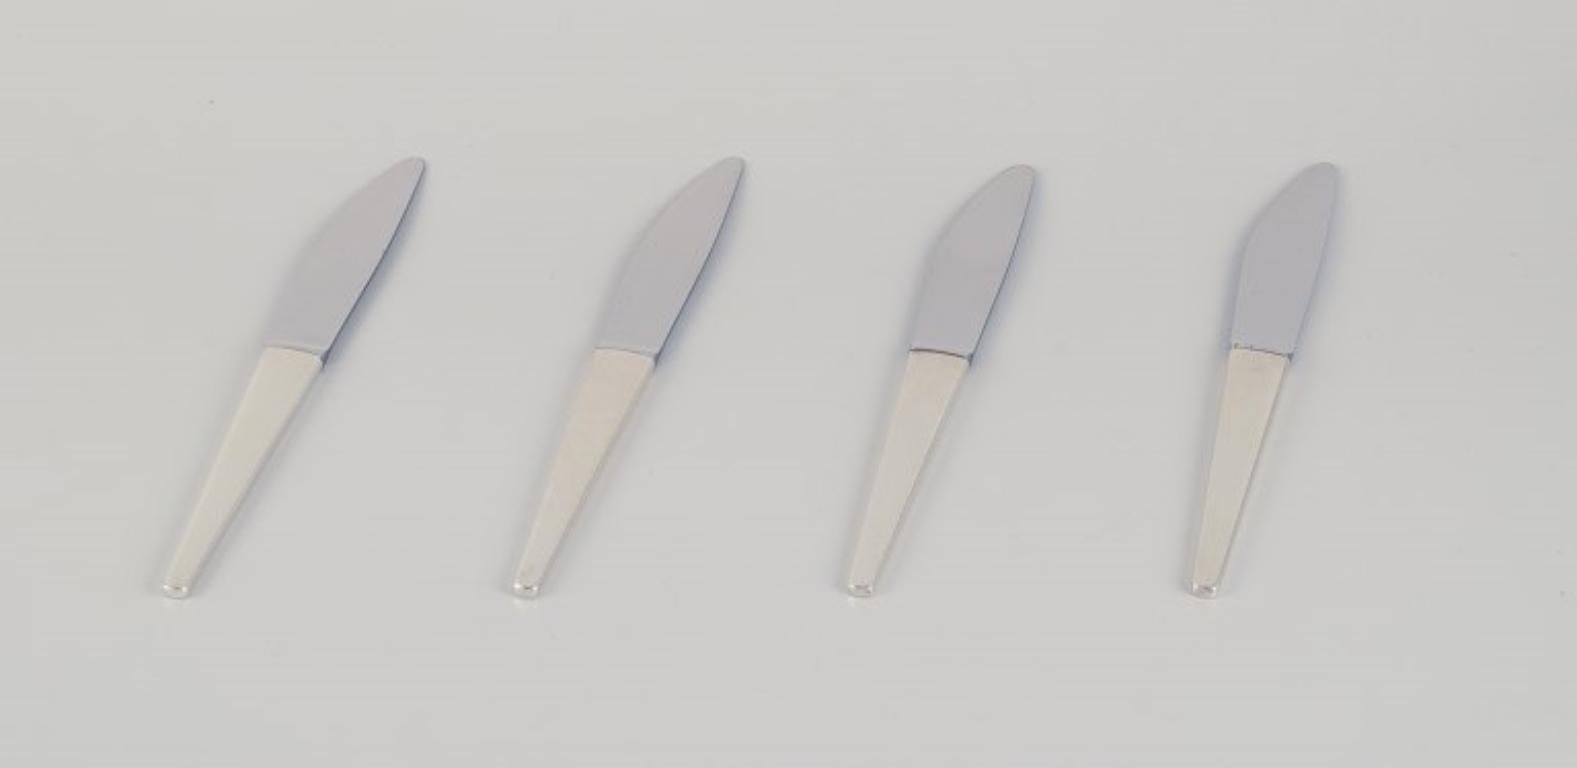 Henning Koppel for Georg Jensen. 
A set of four Caravel dinner knives in sterling silver with stainless steel blades.
1960s/1970s.
Perfect condition.
Dimensions: L 21.5 cm.